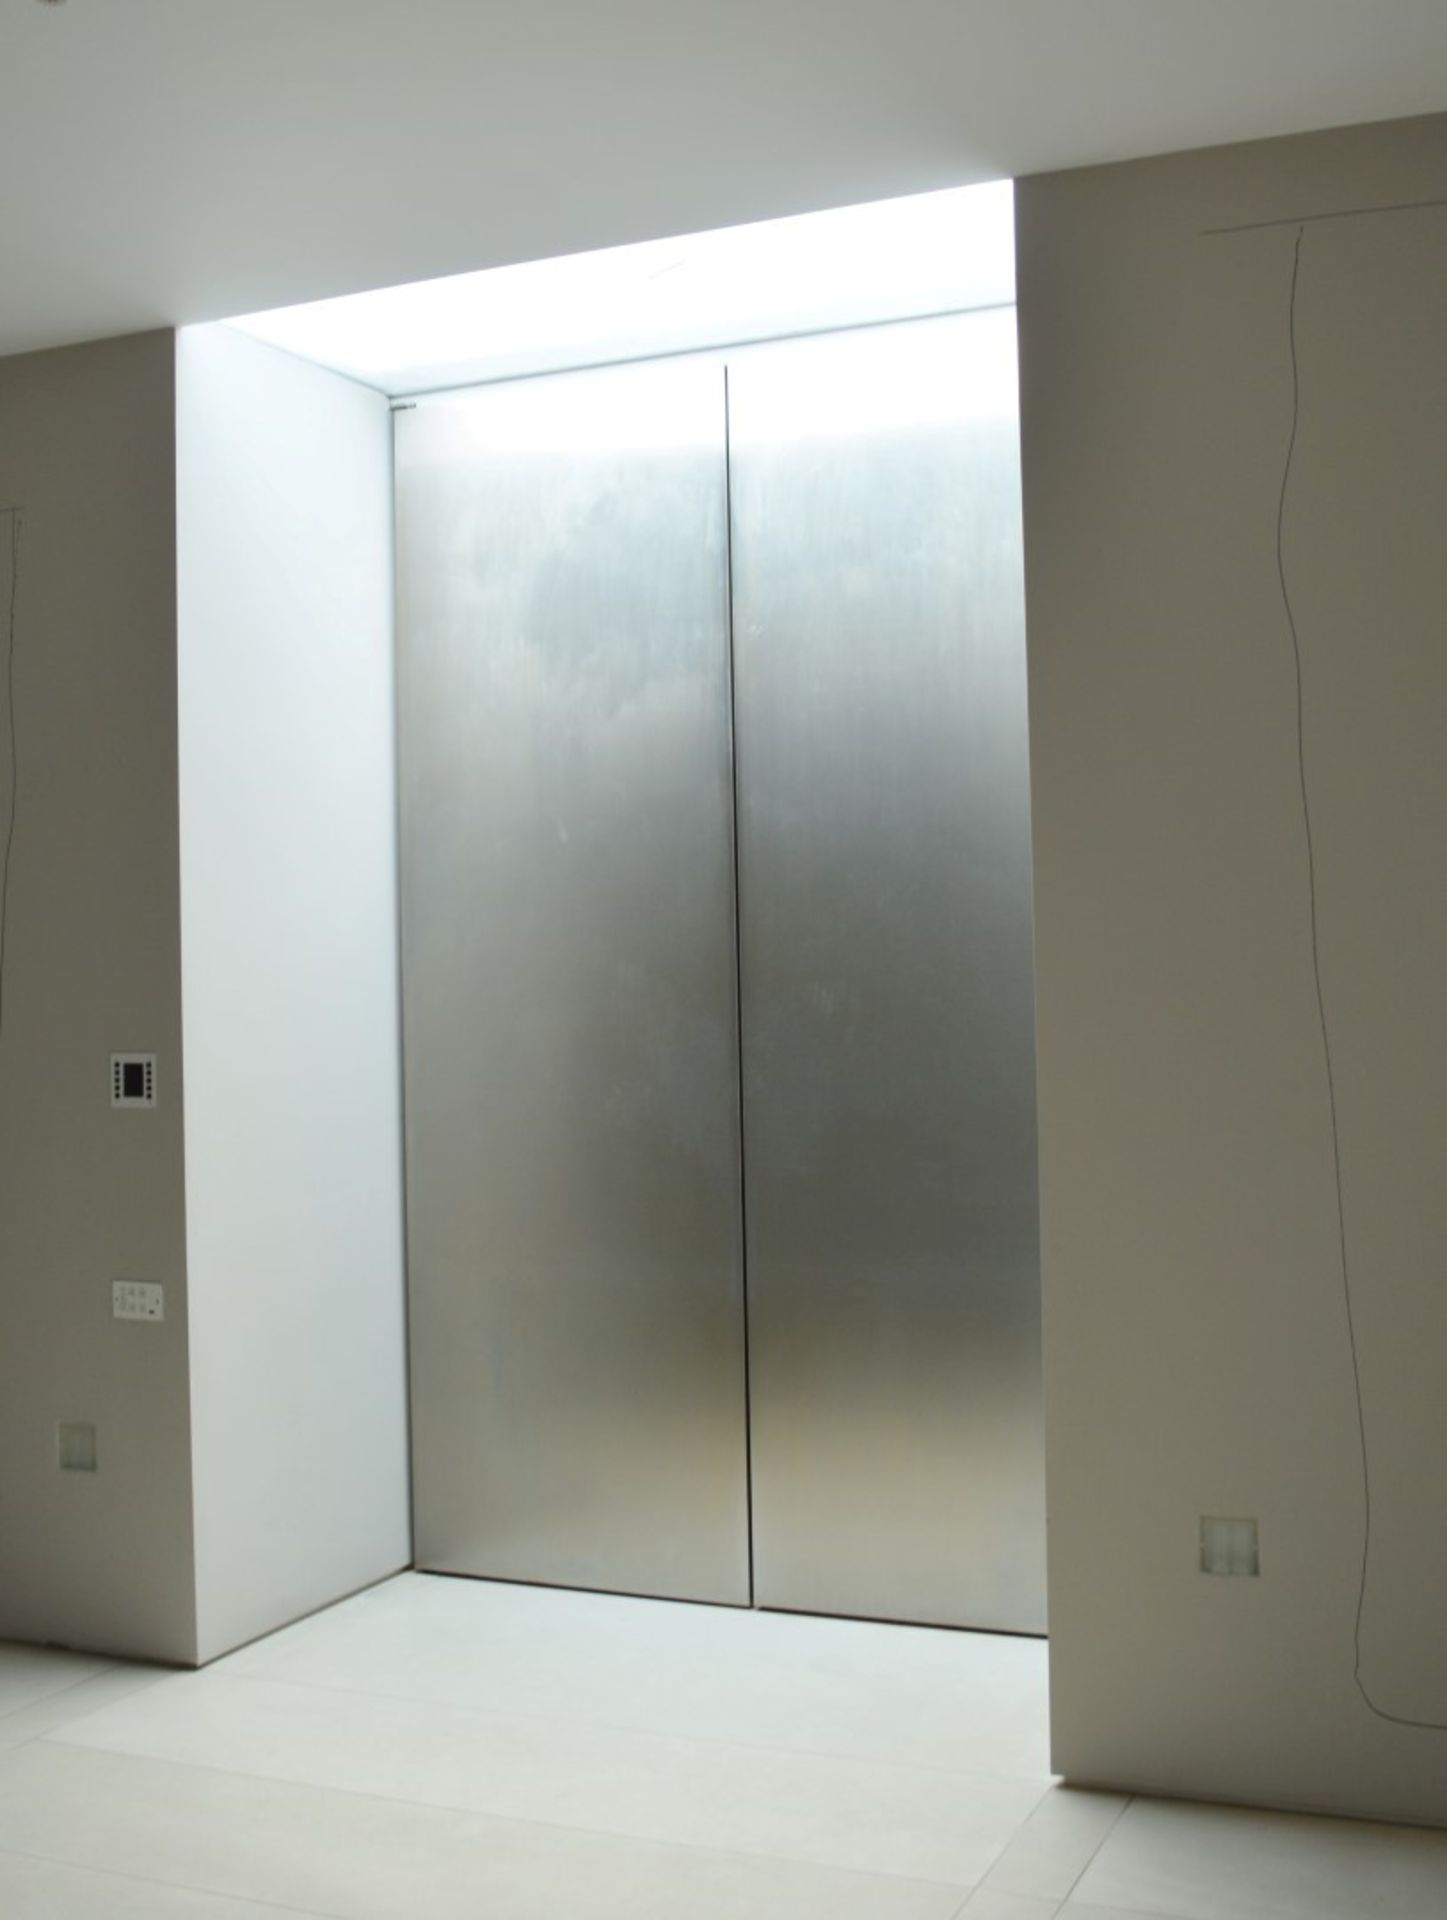 2 x Bespoke Internal Doors With Stainless Steel Finish - Pair of - Large Size - Ideal For Interior - Image 5 of 10